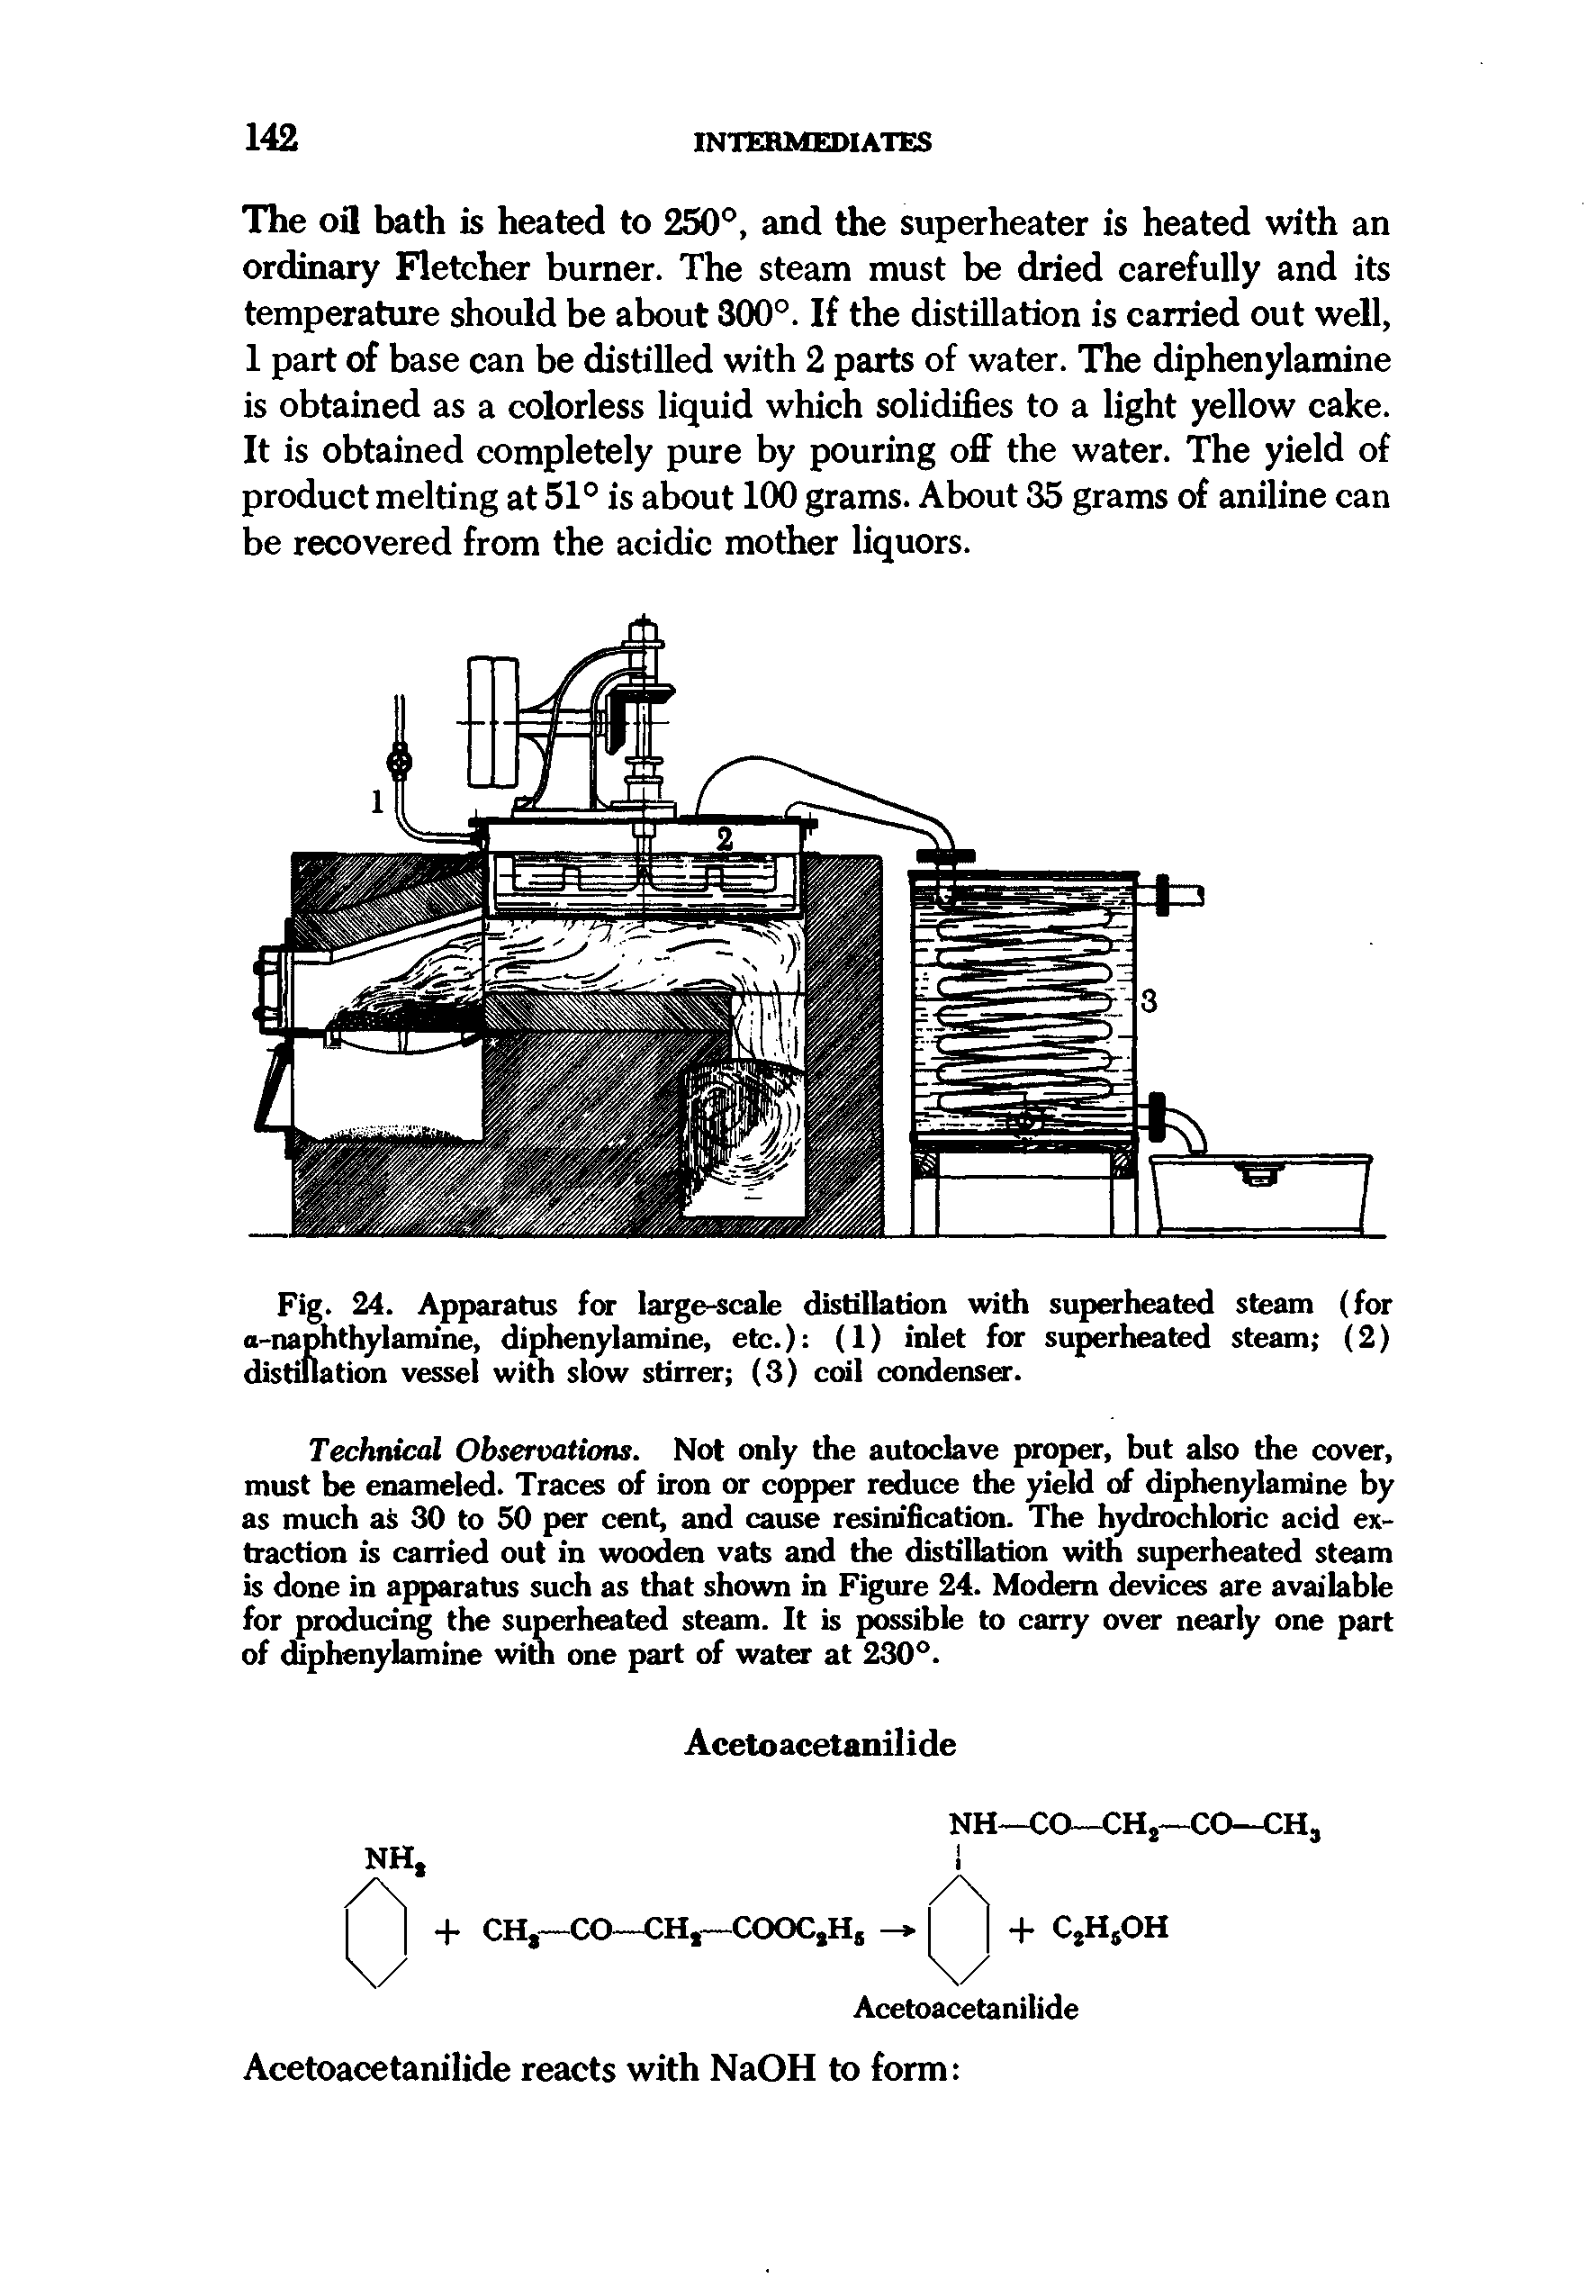 Fig. 24. Apparatus for large-scale distillation with superheated steam (for o-naphthylamine, diphenylamine, etc.) (1) inlet for superheated steam (2) distillation vessel with slow stirrer (3) coil condenser.